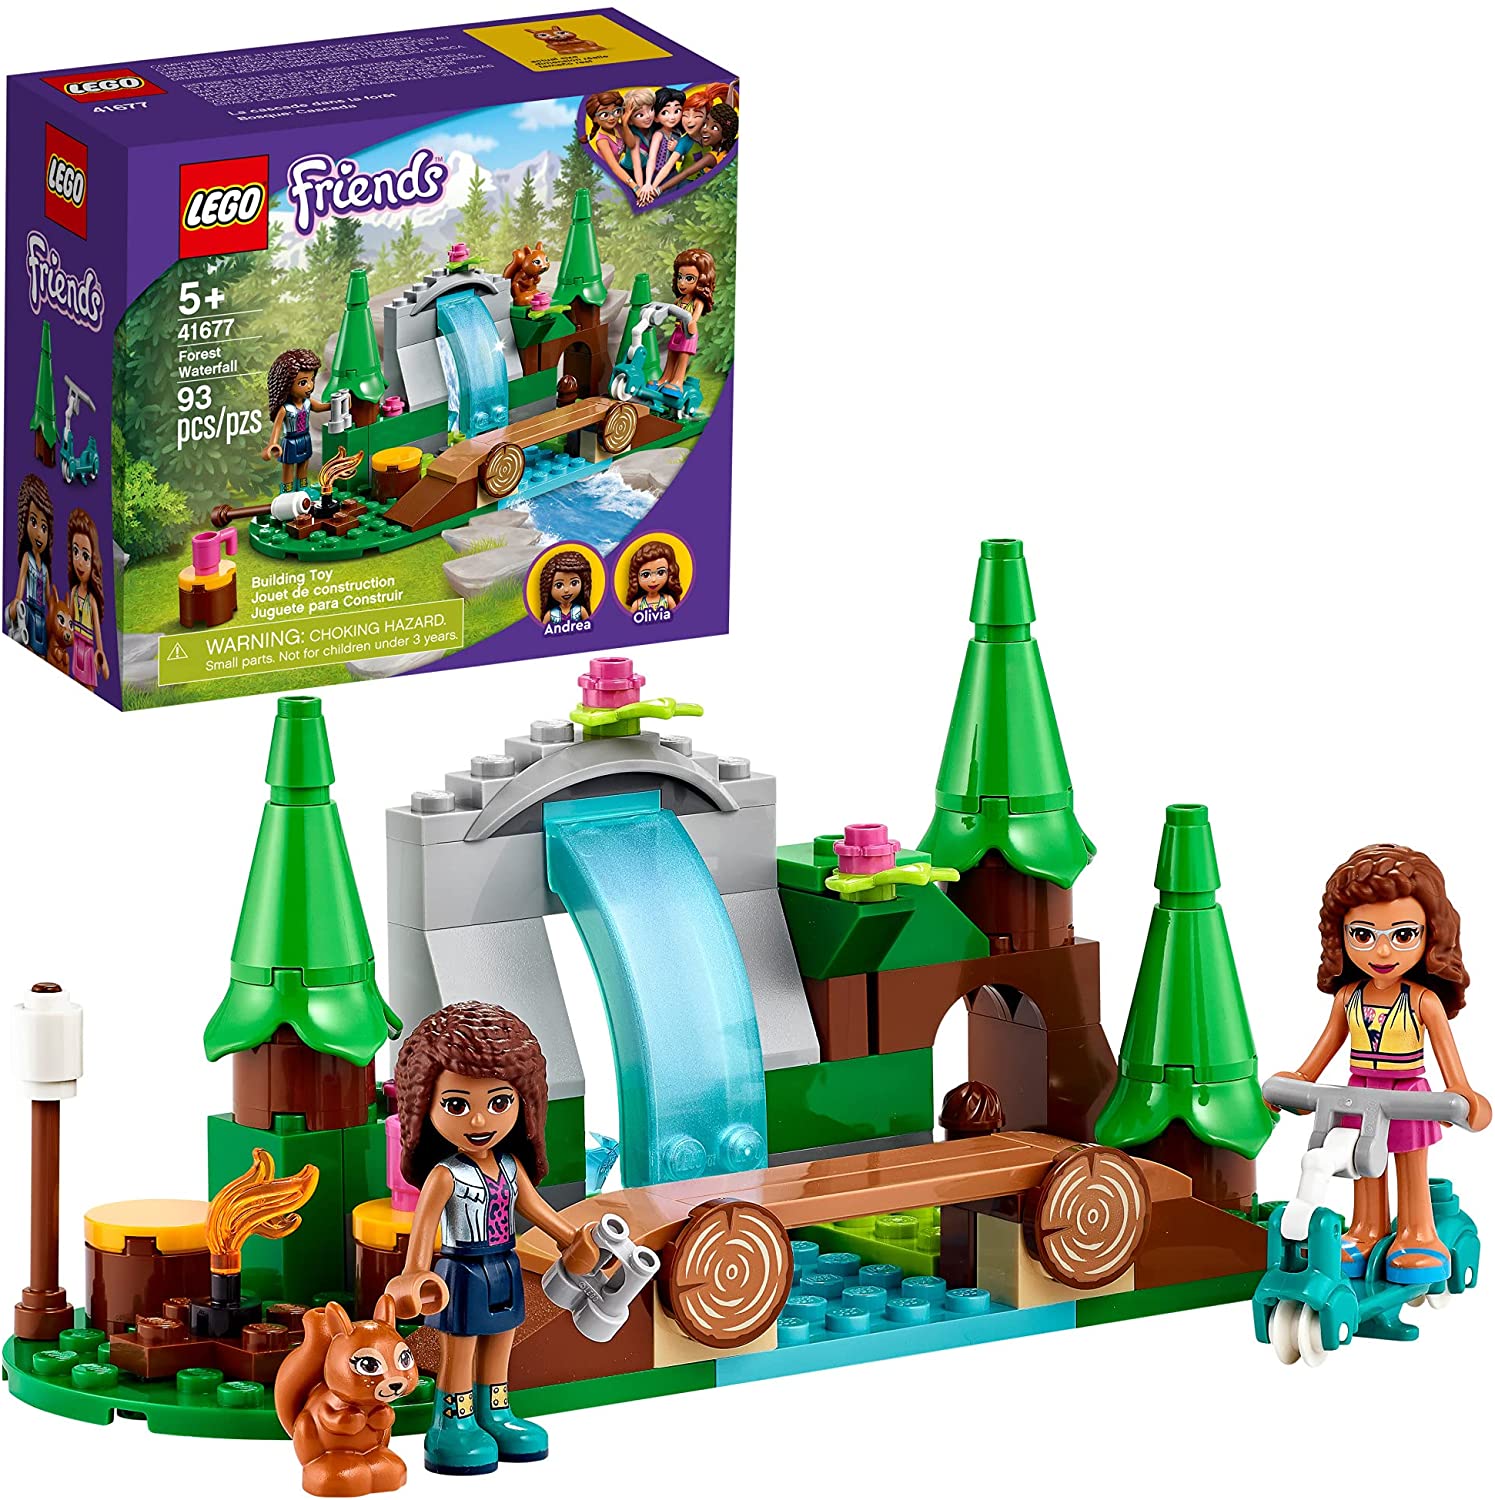 93-Piece Lego Friends Forest Waterfall Building Kit (41677) $6.50 + Free Shipping w/ Walmart+ or Prime or on $25+